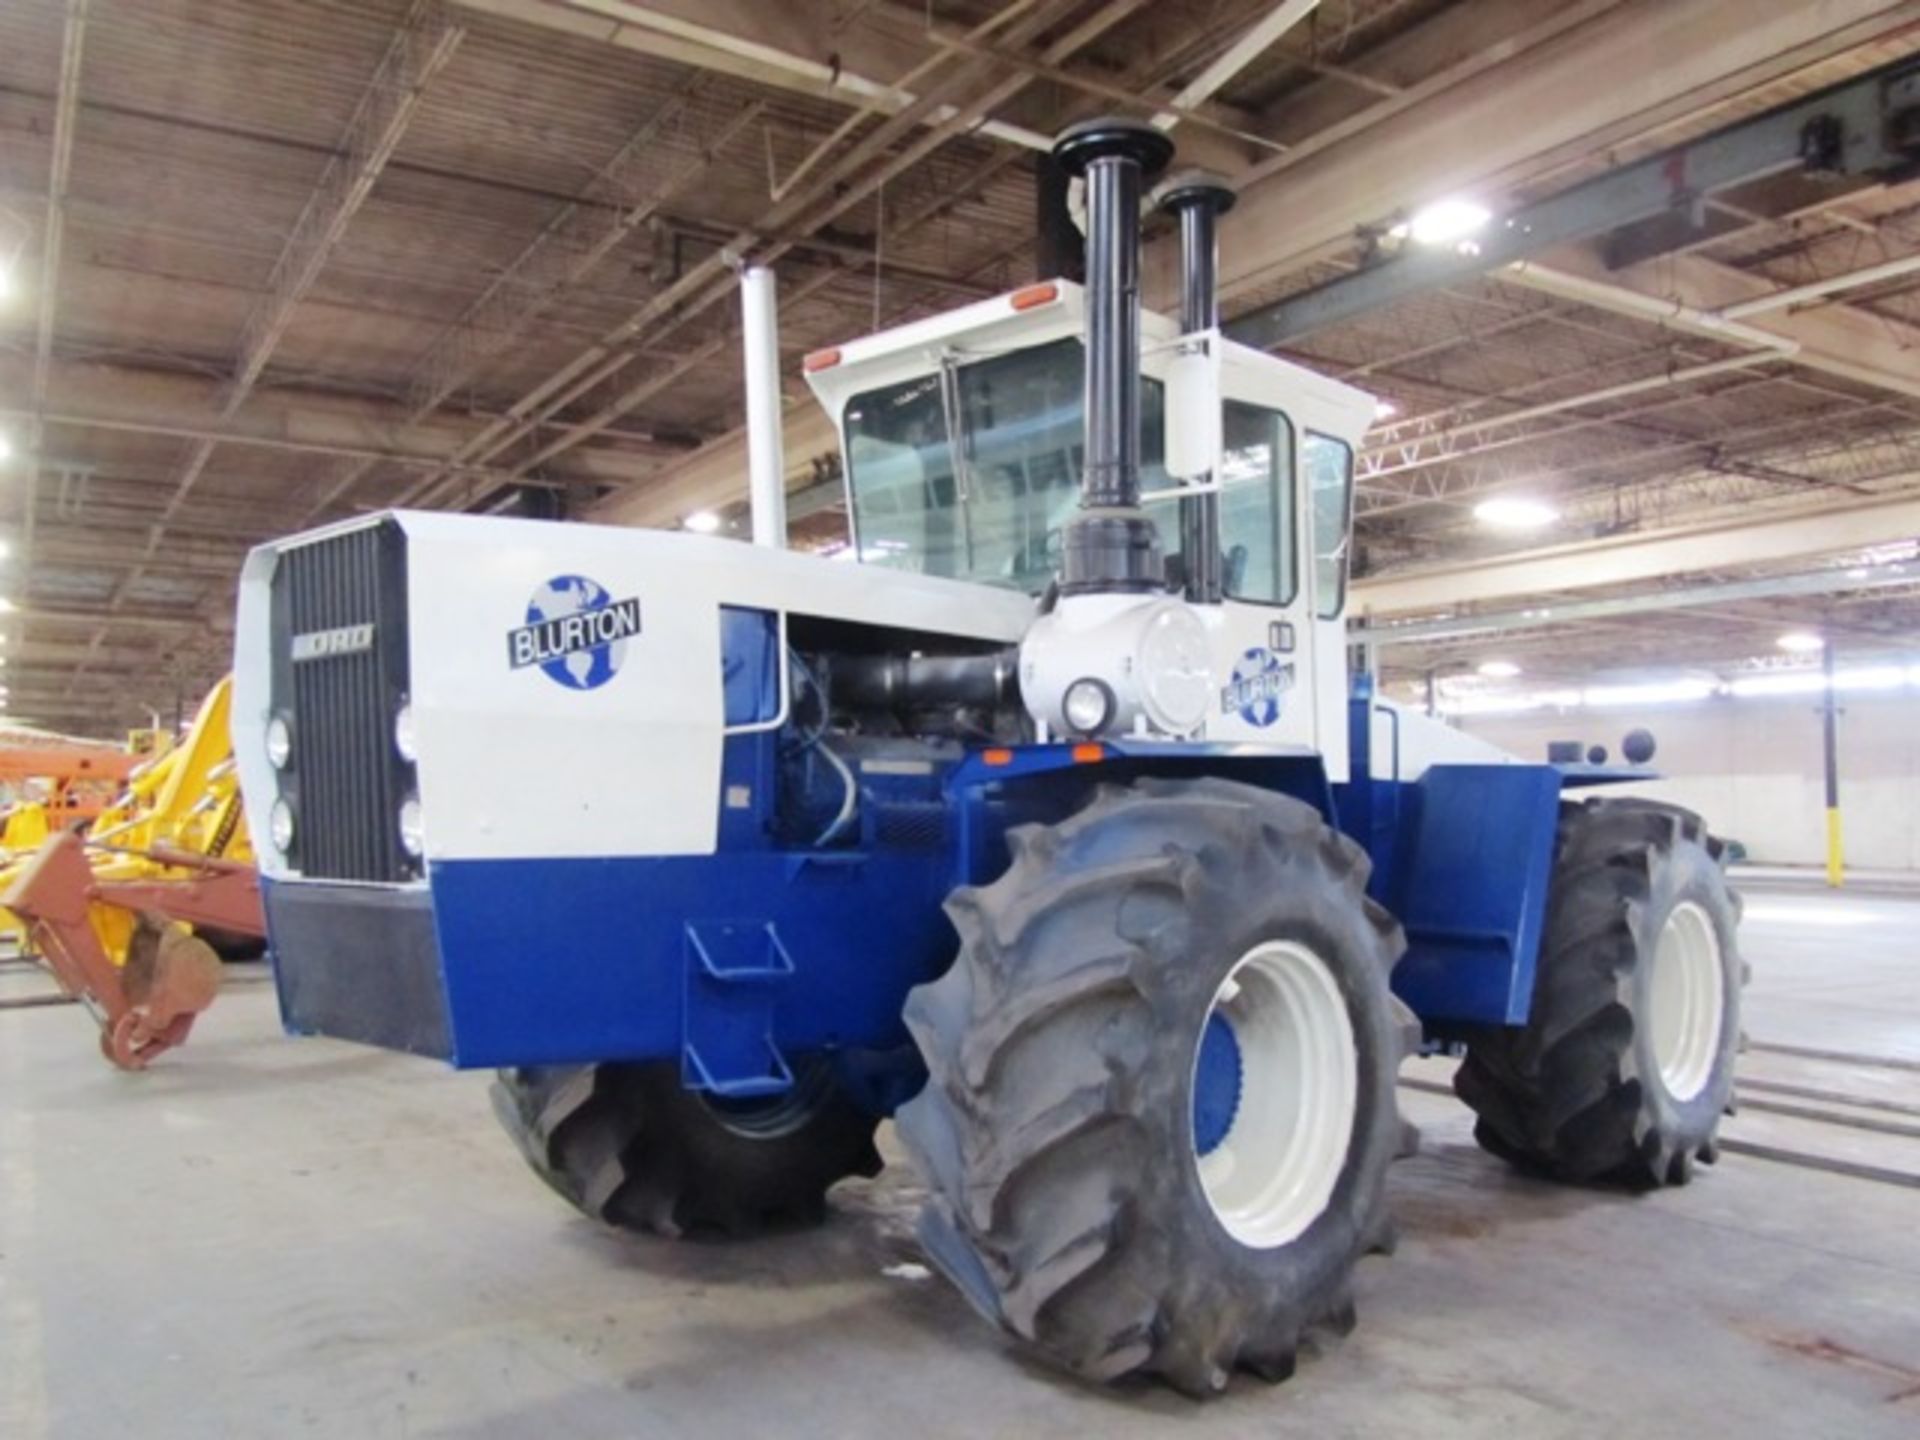 Ford PC311H Rough Terrain Tractor with Articulated Steering, Enclosed Cab, PTO in Rear, Diesel,